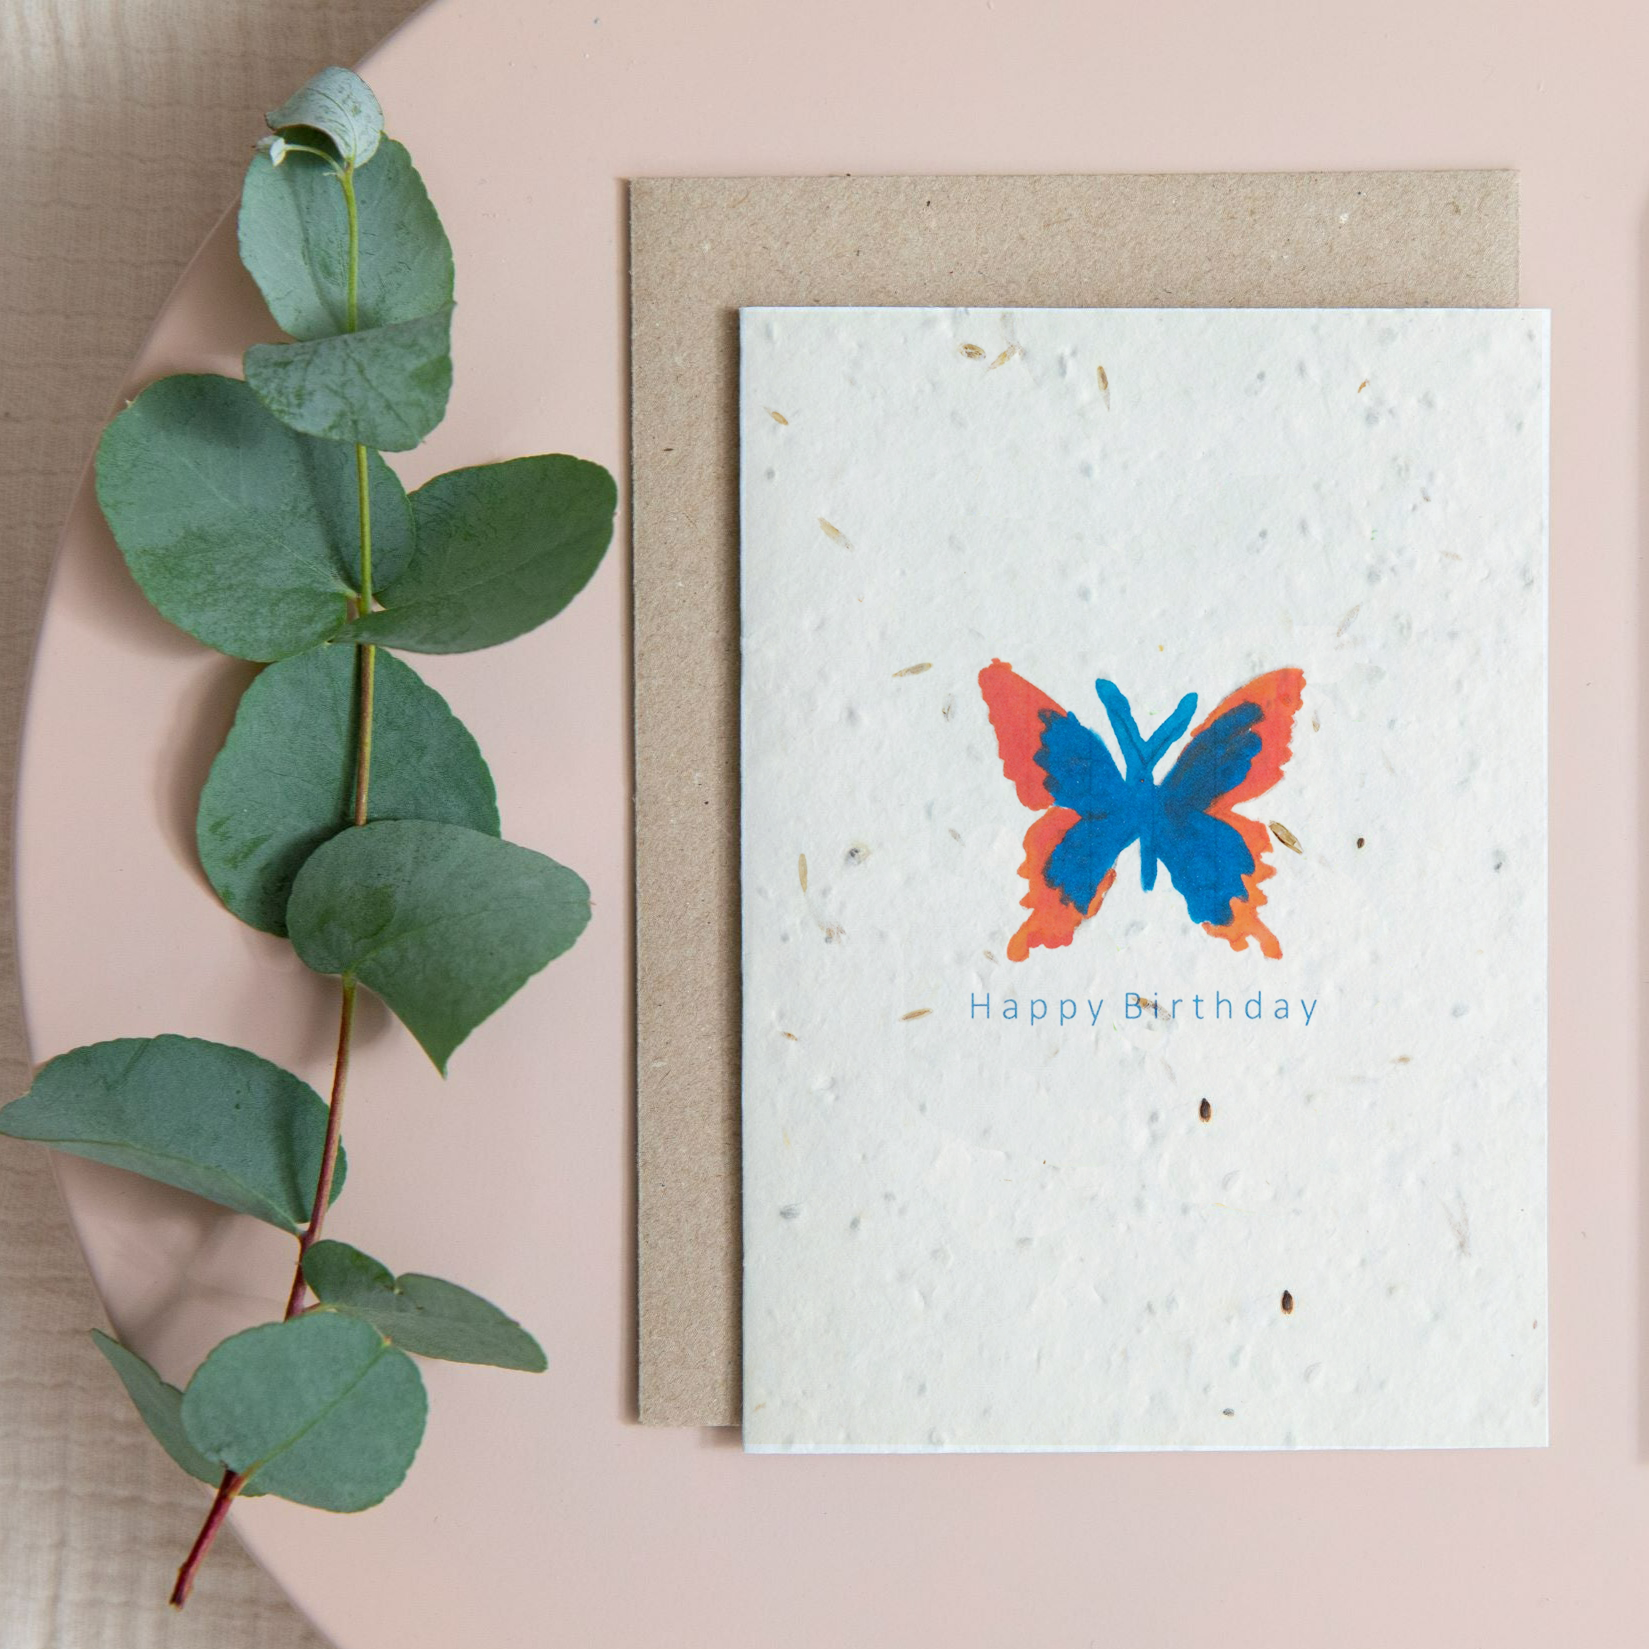 Designed by Refugees Butterfly Birthday Recycled Paper Plantable Greetings Card